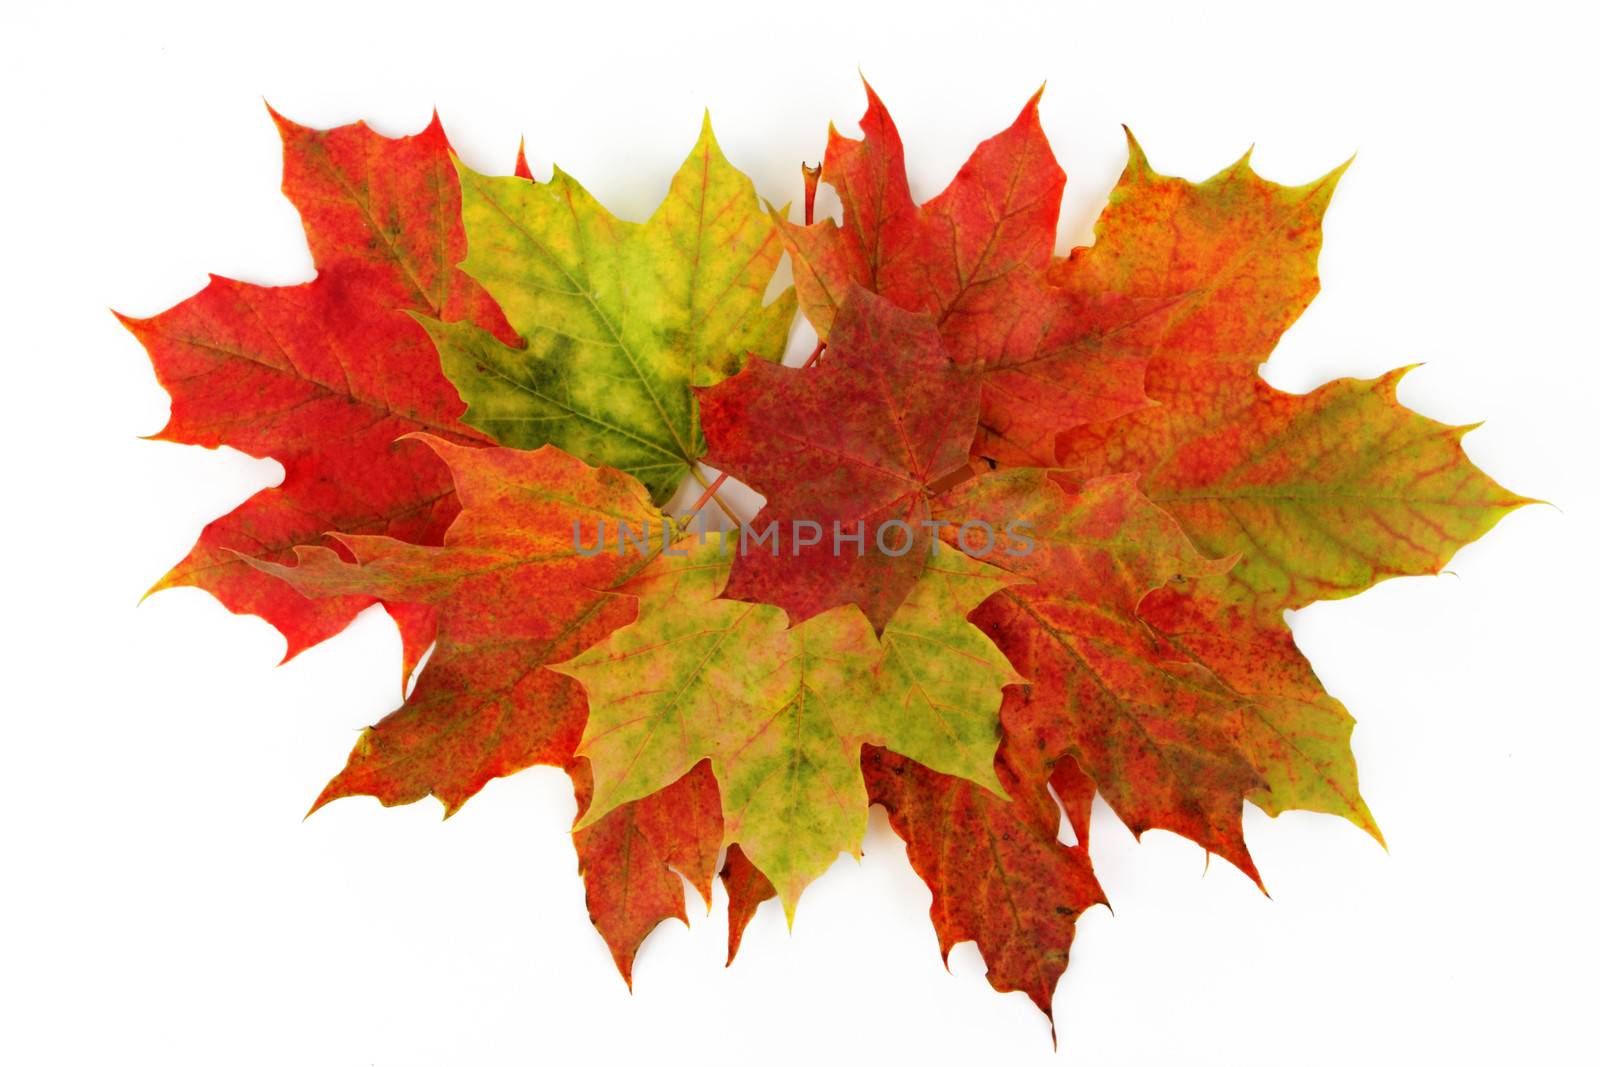 Autumn leaves isolated with white background 